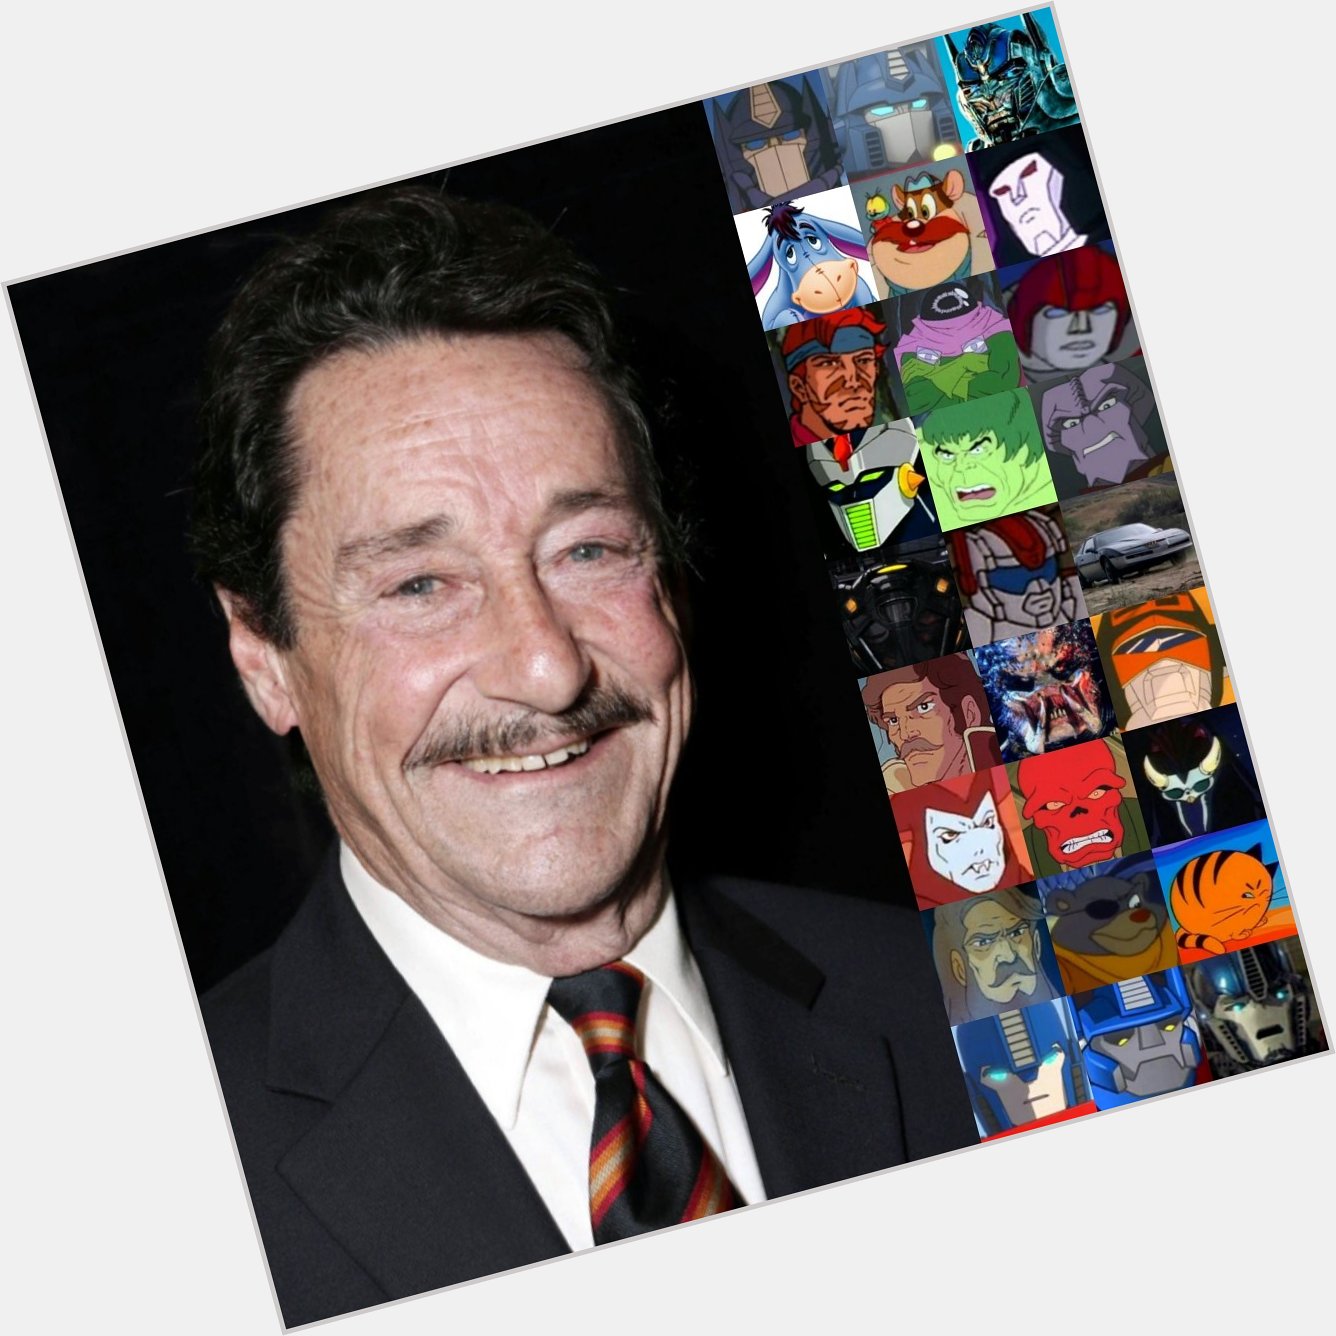 Happy 81st birthday to the legend Peter Cullen! 

The voice of my favorite character, Optimus Prime. 